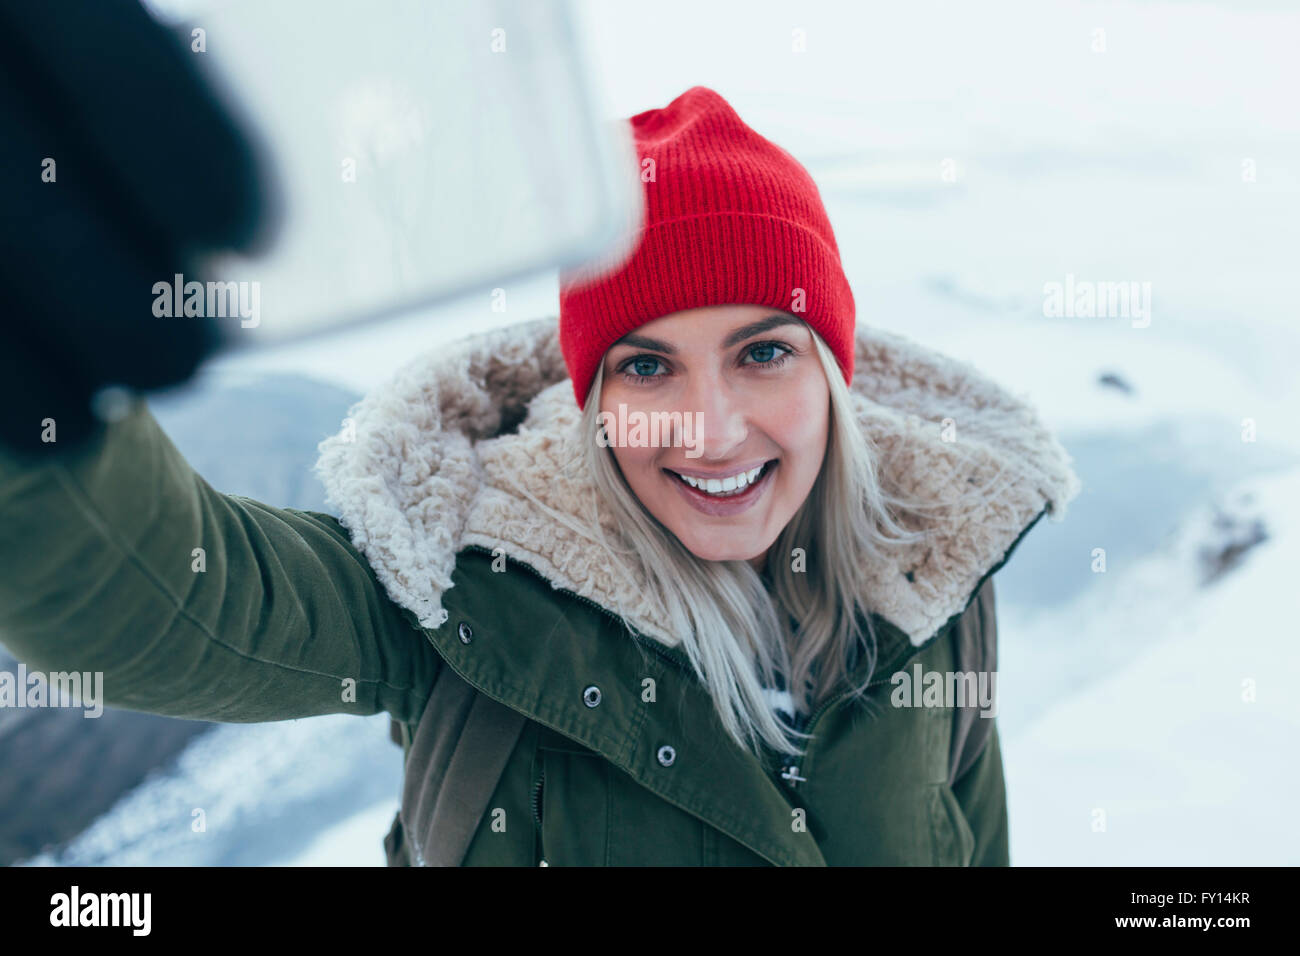 Smiling young woman on smart phone selfies en hiver Banque D'Images